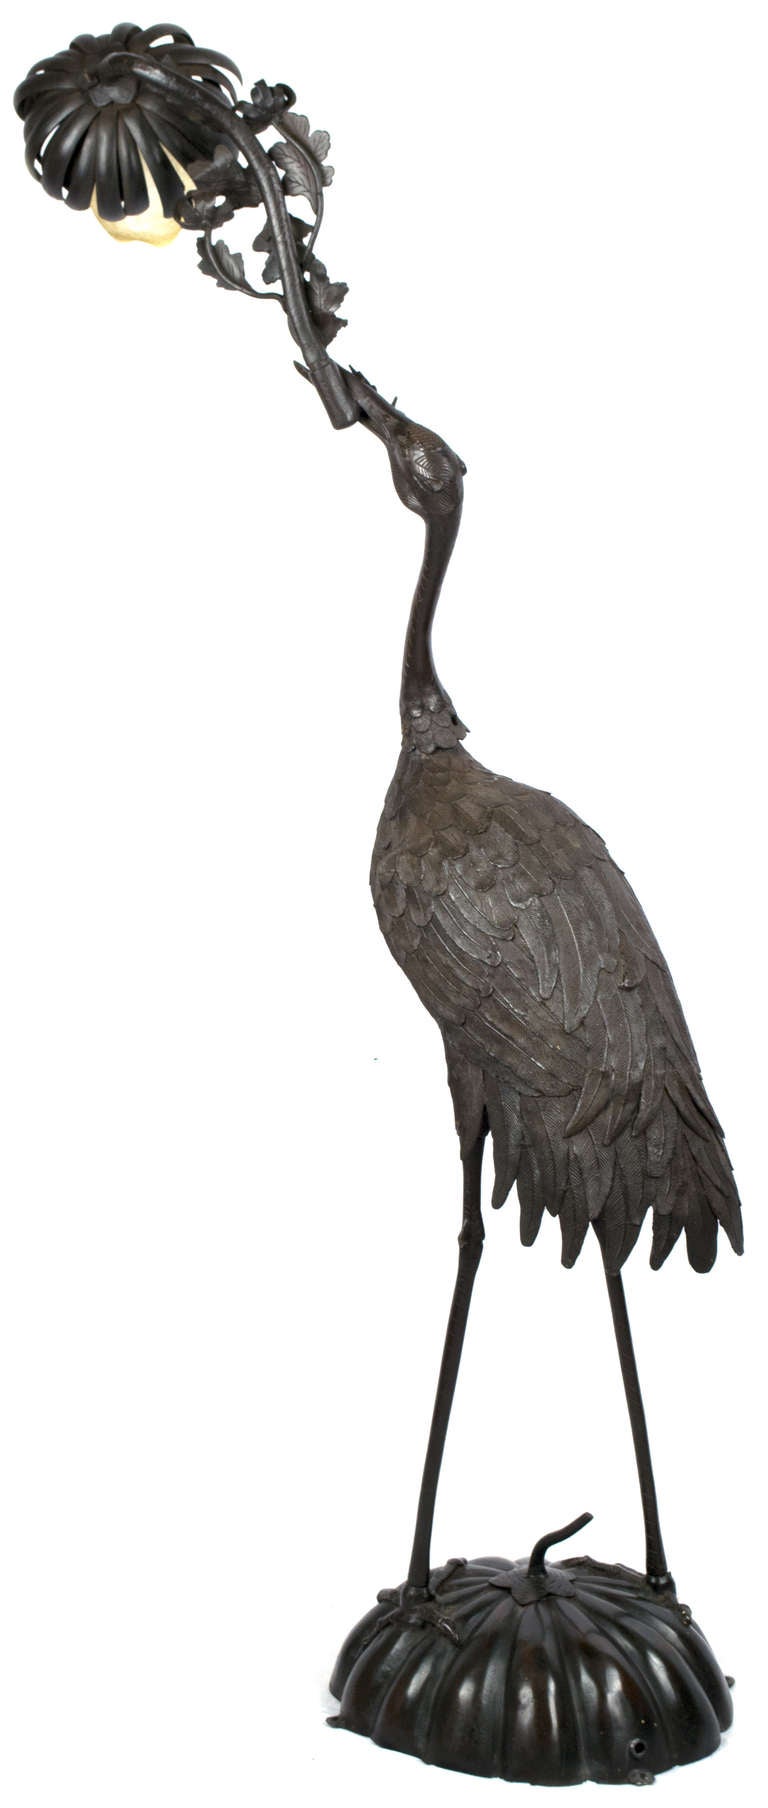 This sculpture of a crane standing on a gourd and holding aloft a blossoming branch adjusts in three places (i.e. the neck, branch, and top). It is exquisitely cast, cold chased, and fitted with a period, blown-glass shade.